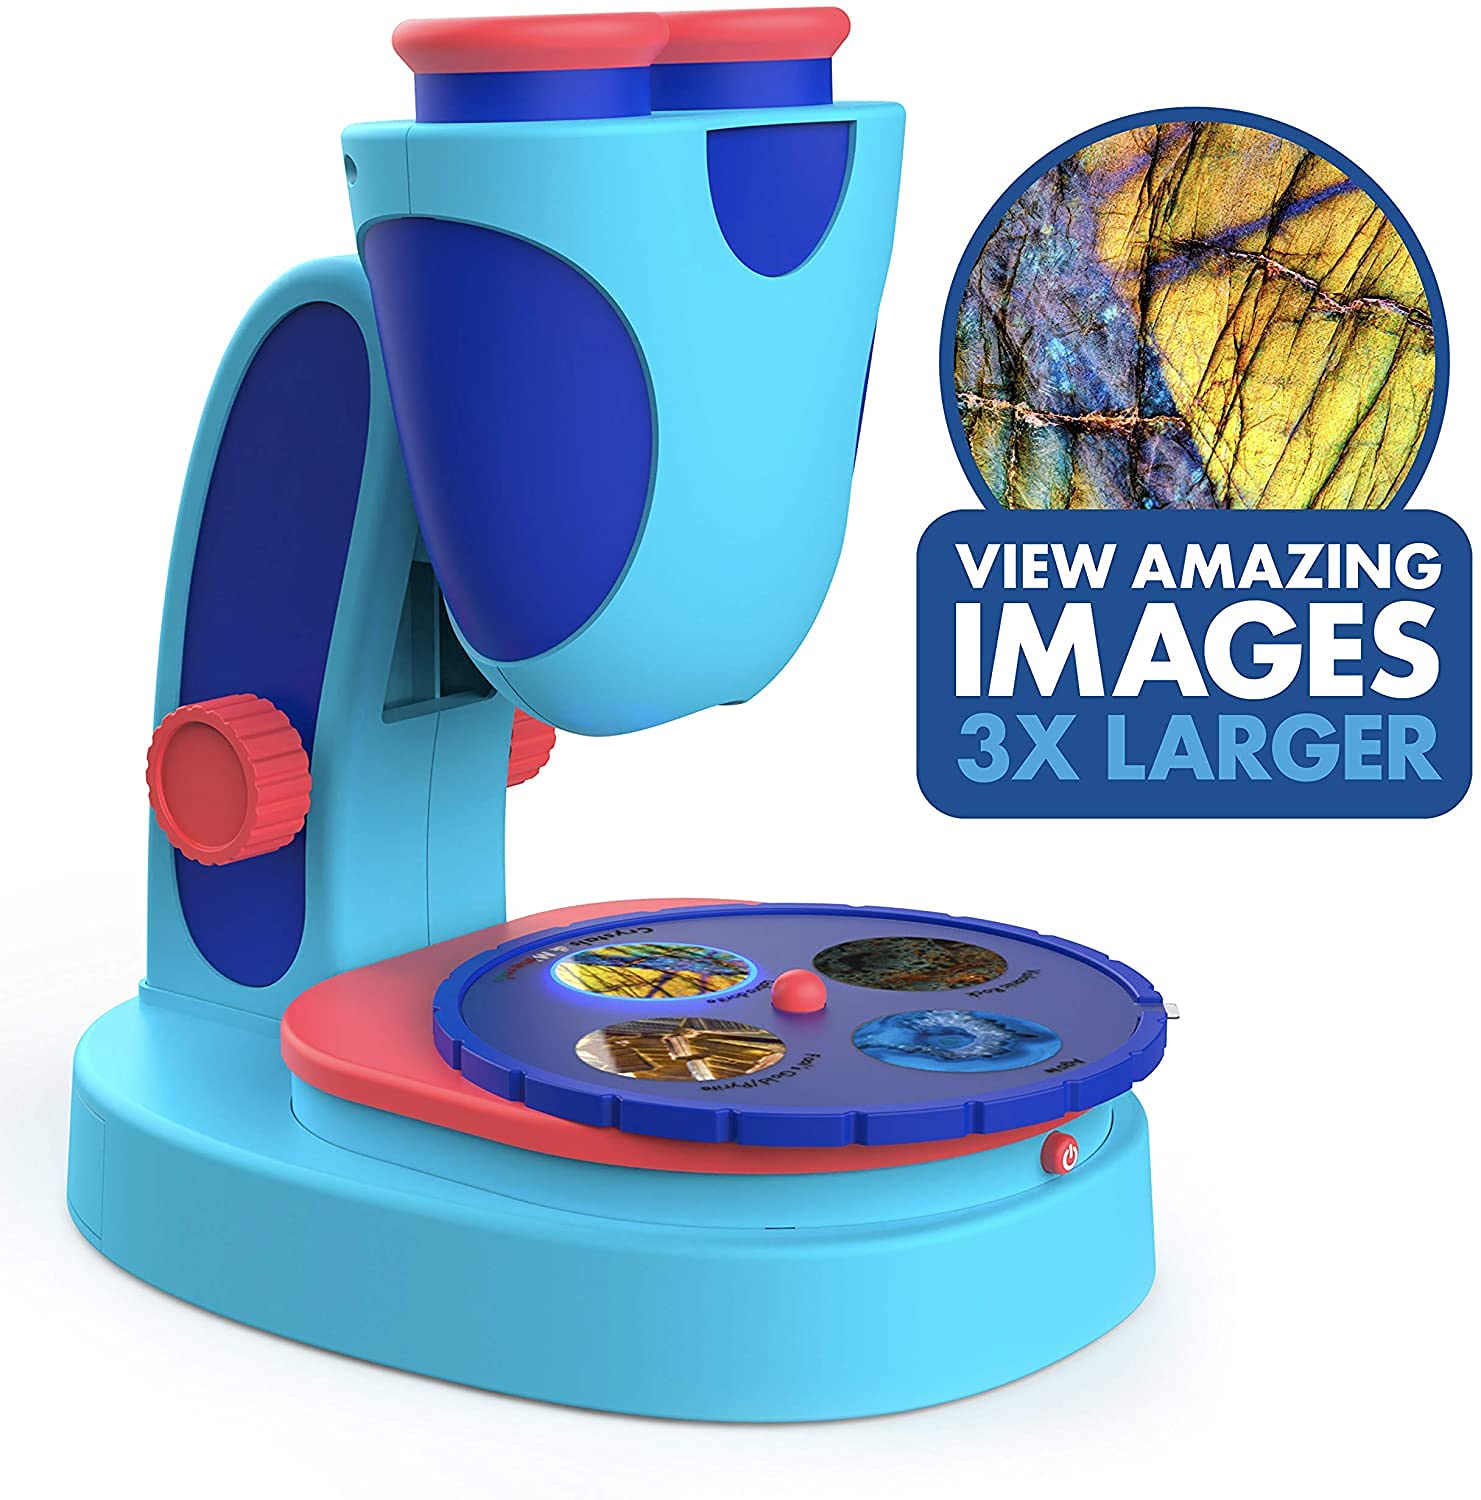 Micro Marvels - STEM Kids Microscope Toy for Explorers, Ages 5+ Perfect Gift for Inquisitive Boys & Girls